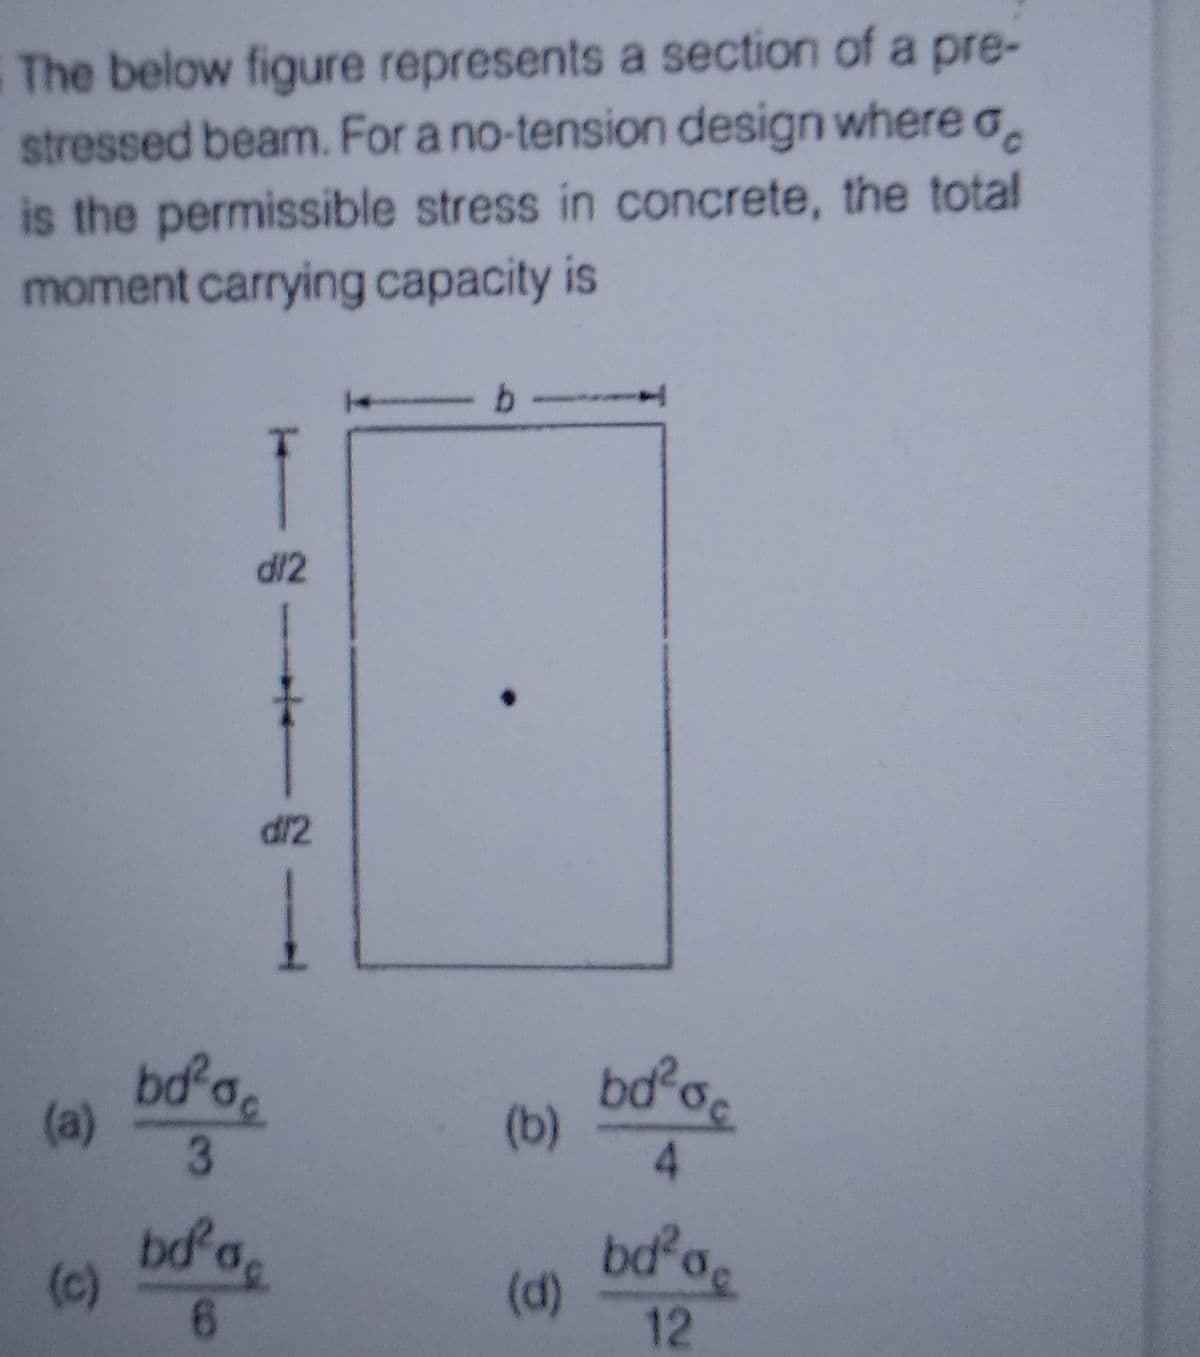 The below figure represents a section of a pre-
stressed beam. For a no-tension design where a
is the permissible stress in concrete, the total
moment carrying capacity is
(a)
(c)
d/2
bd²
6
d/2
bd²oc
3
-b-
(b)
(d)
bd² oc
4
bd²a
12